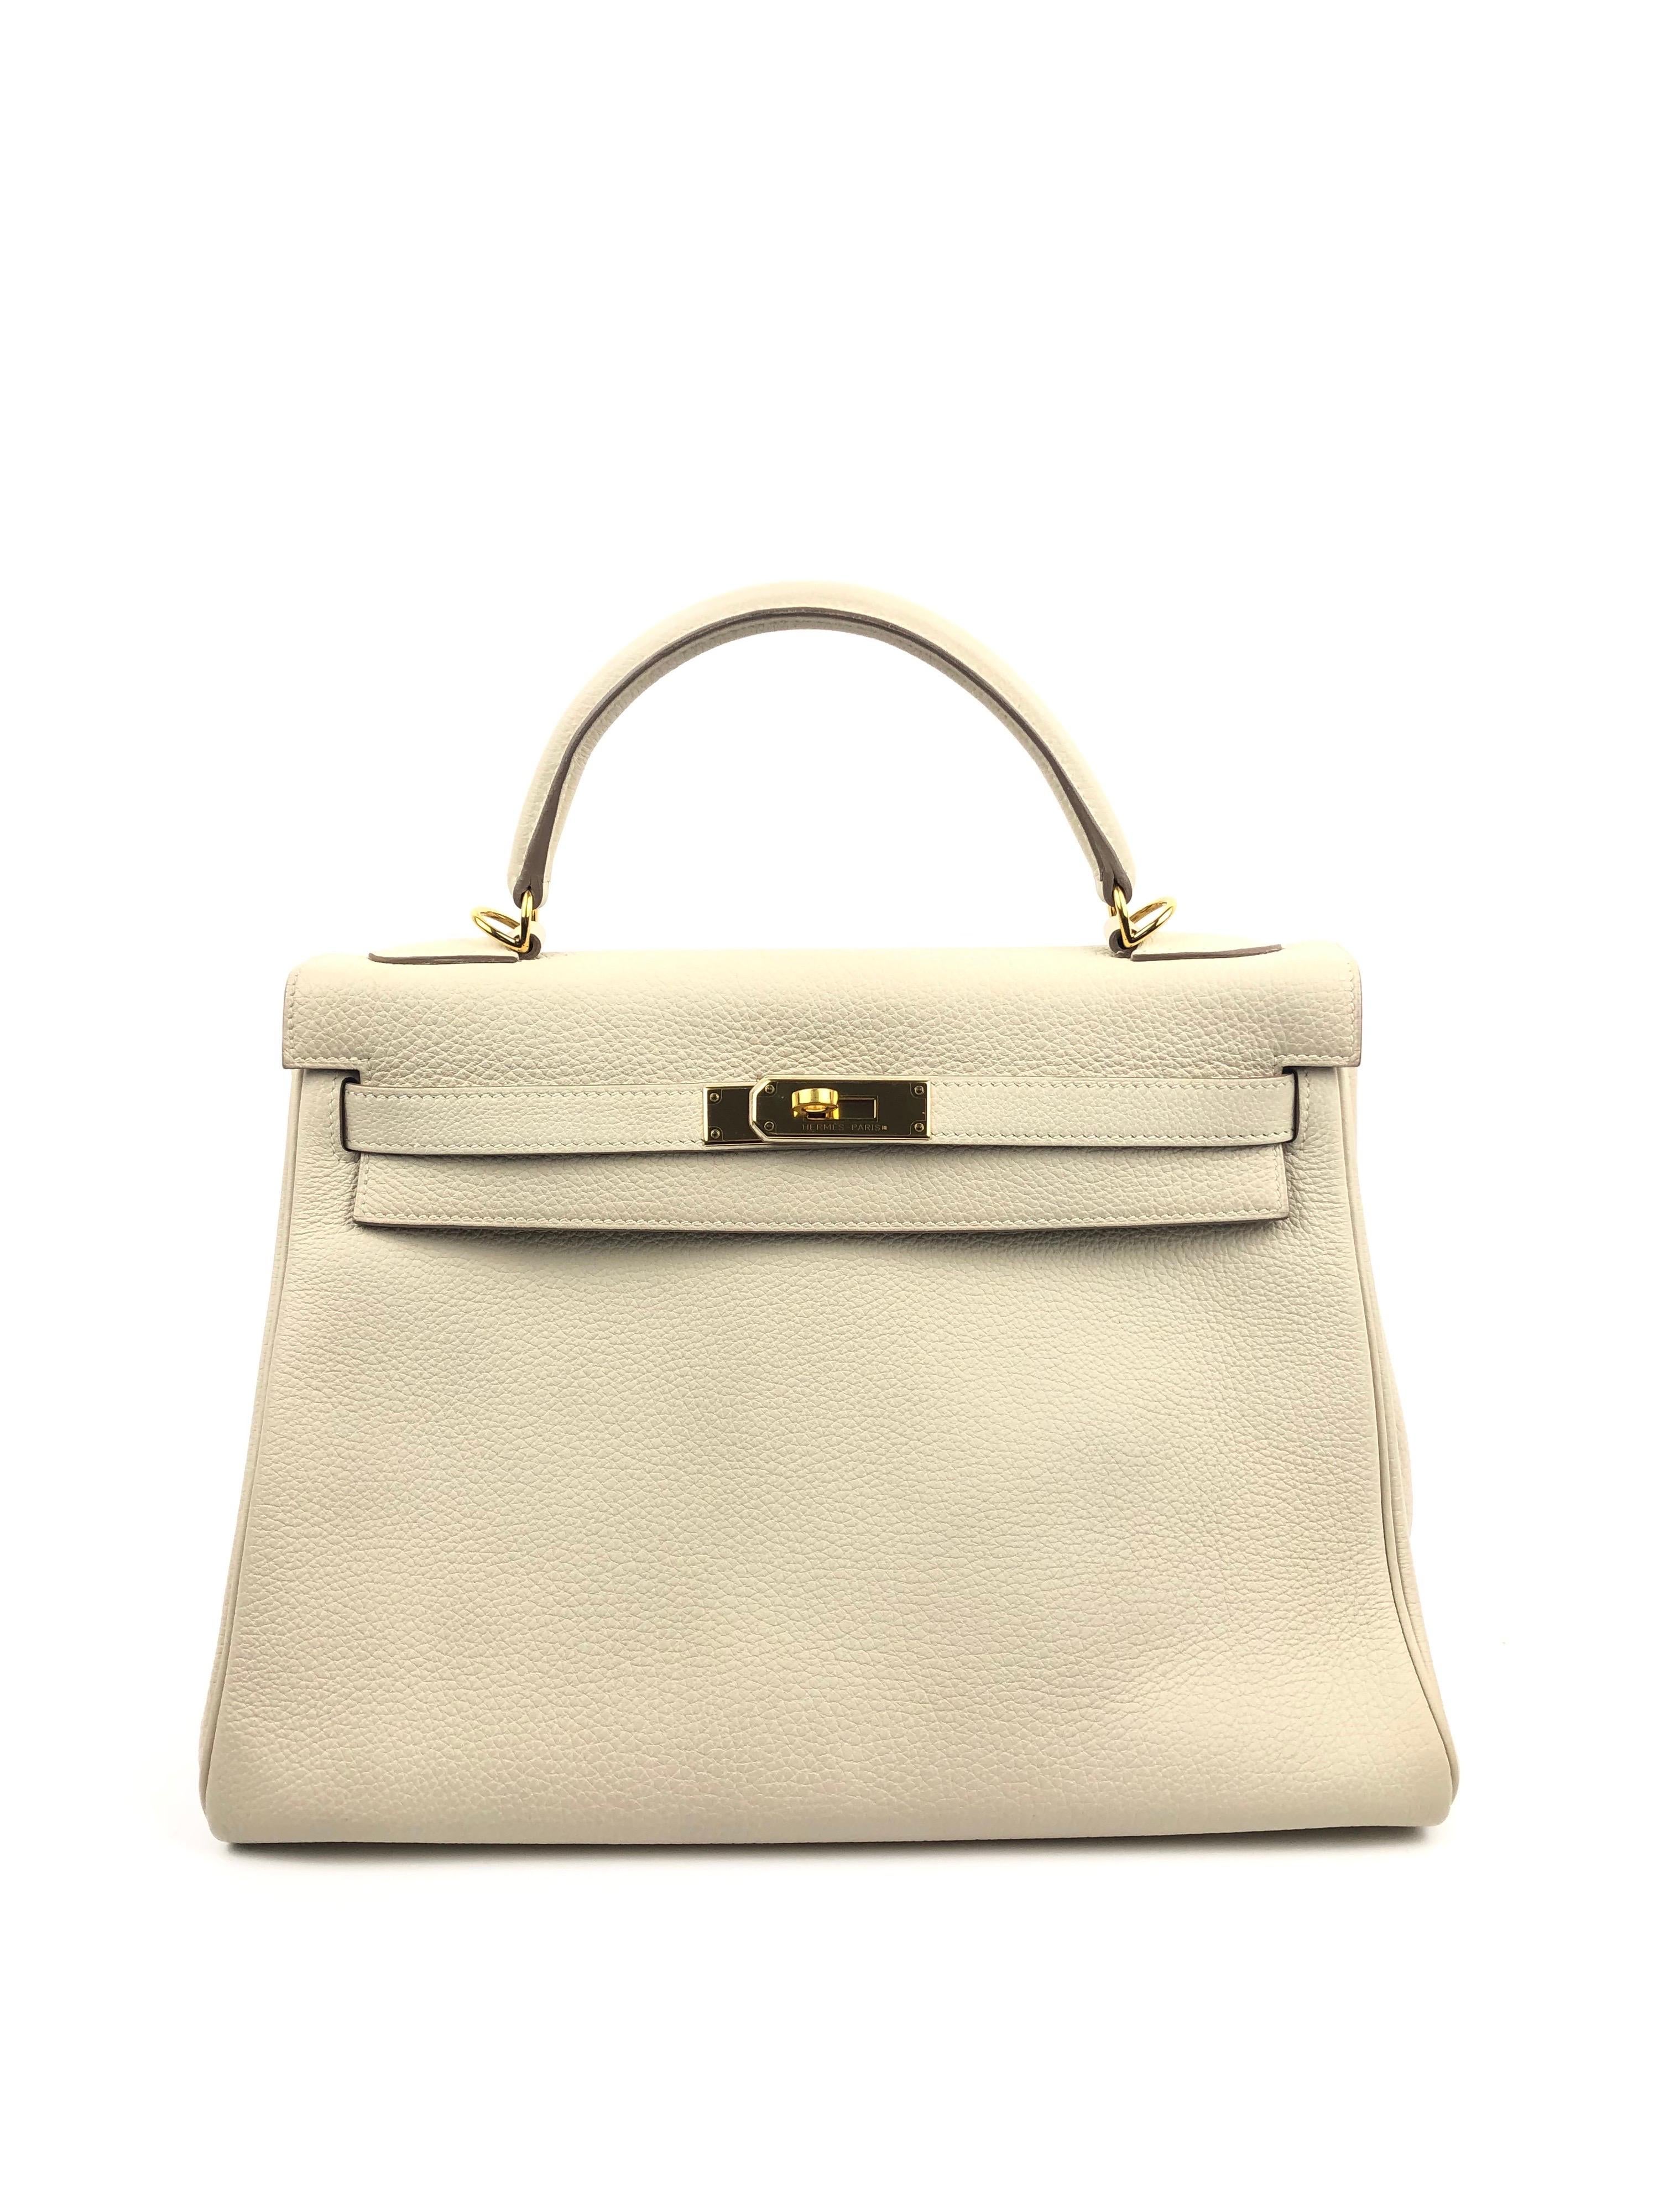 Hermes Kelly 32 Parchemin Beige Togo Gold Hardware. Pristine condition Plastic On Hardware.

Shop with confidence from Lux Addicts. Authenticity guaranteed or money back.